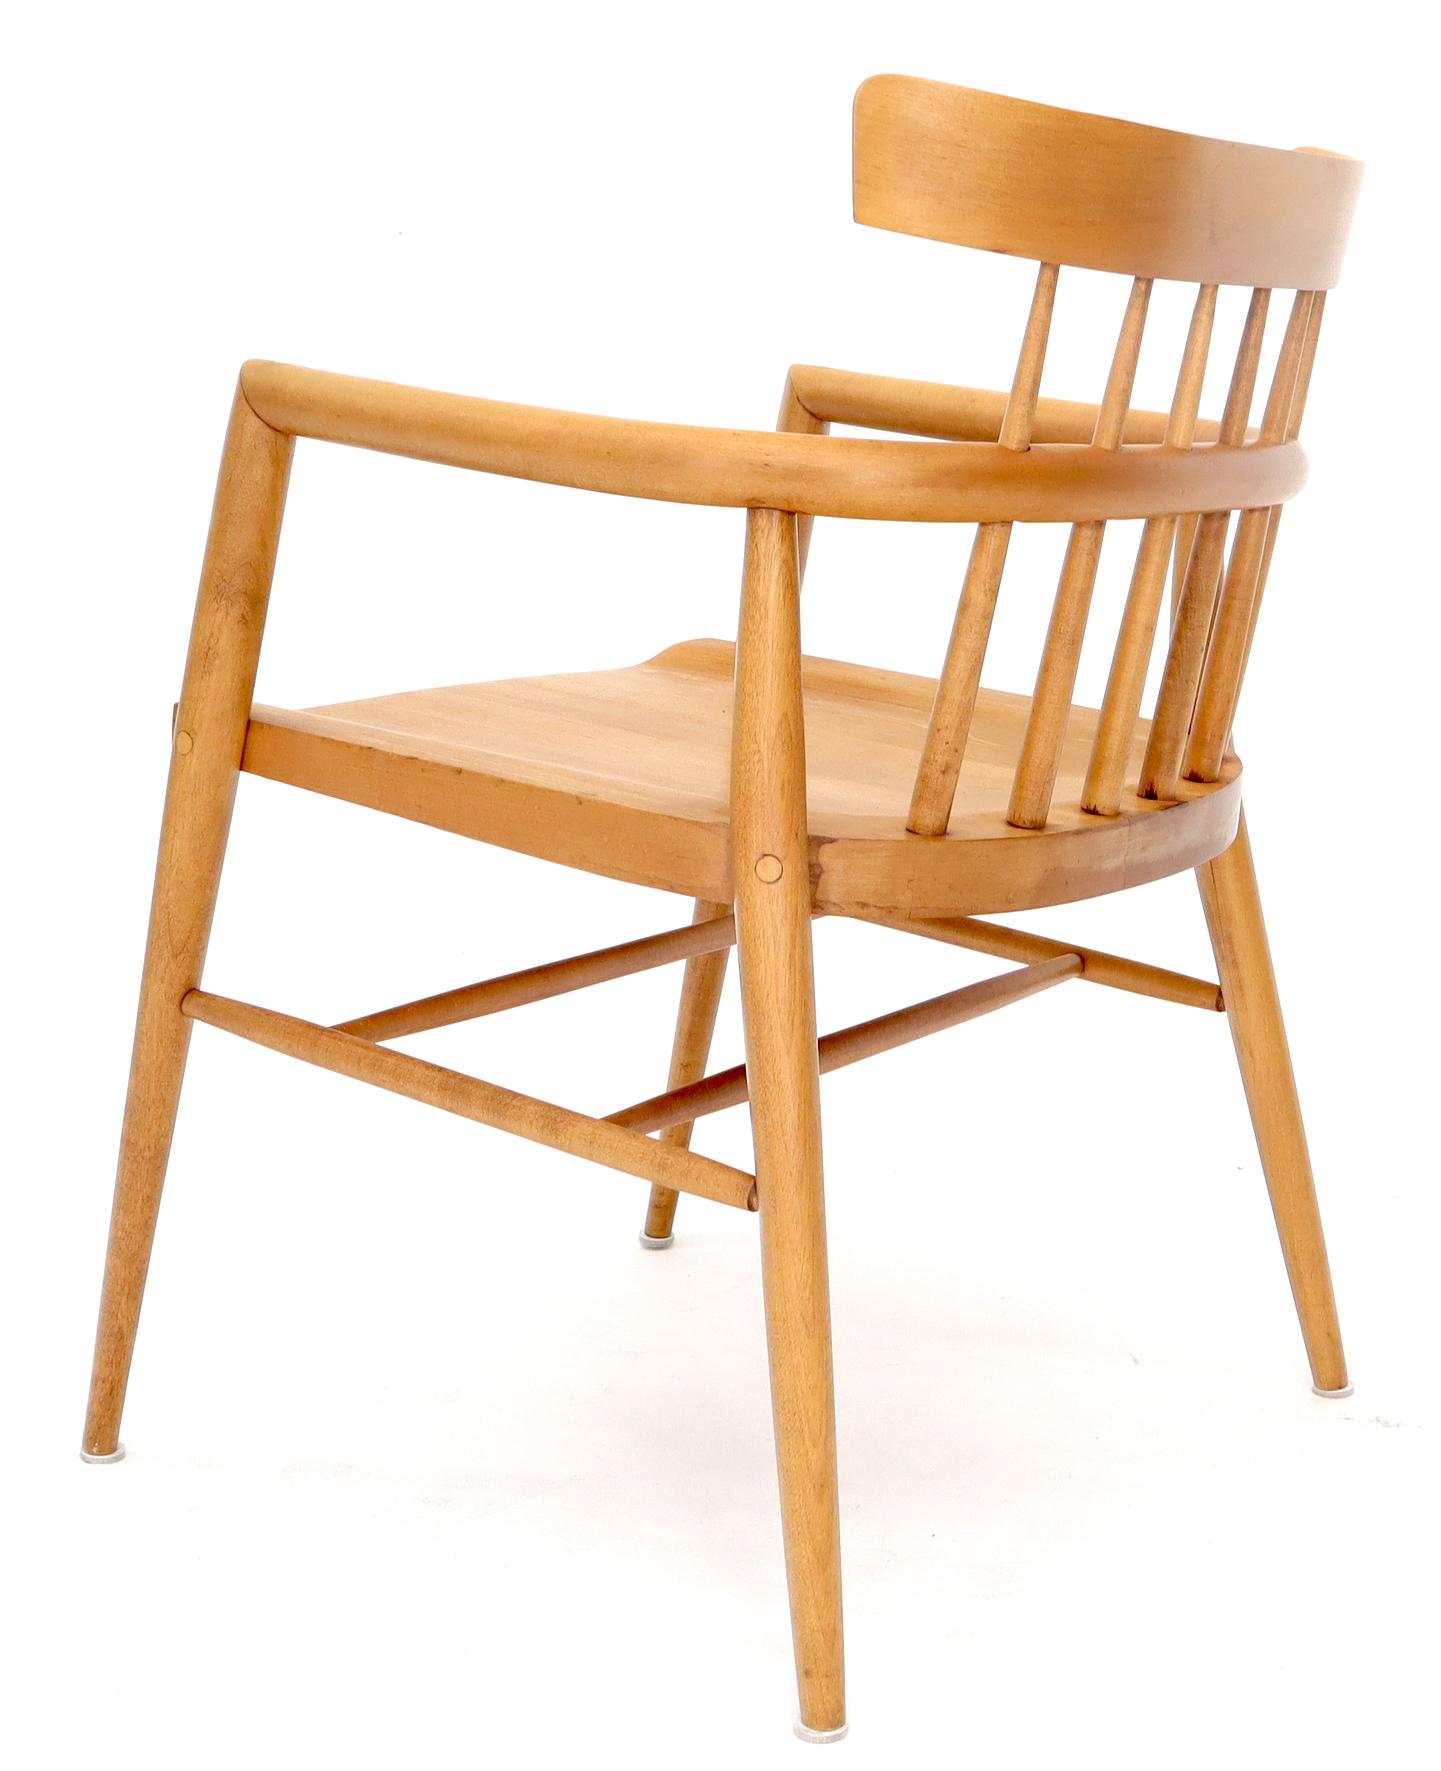 Solid Birch Barrel Back Bent Wood Spindle Back Armchair Desk Chair In Excellent Condition For Sale In Rockaway, NJ